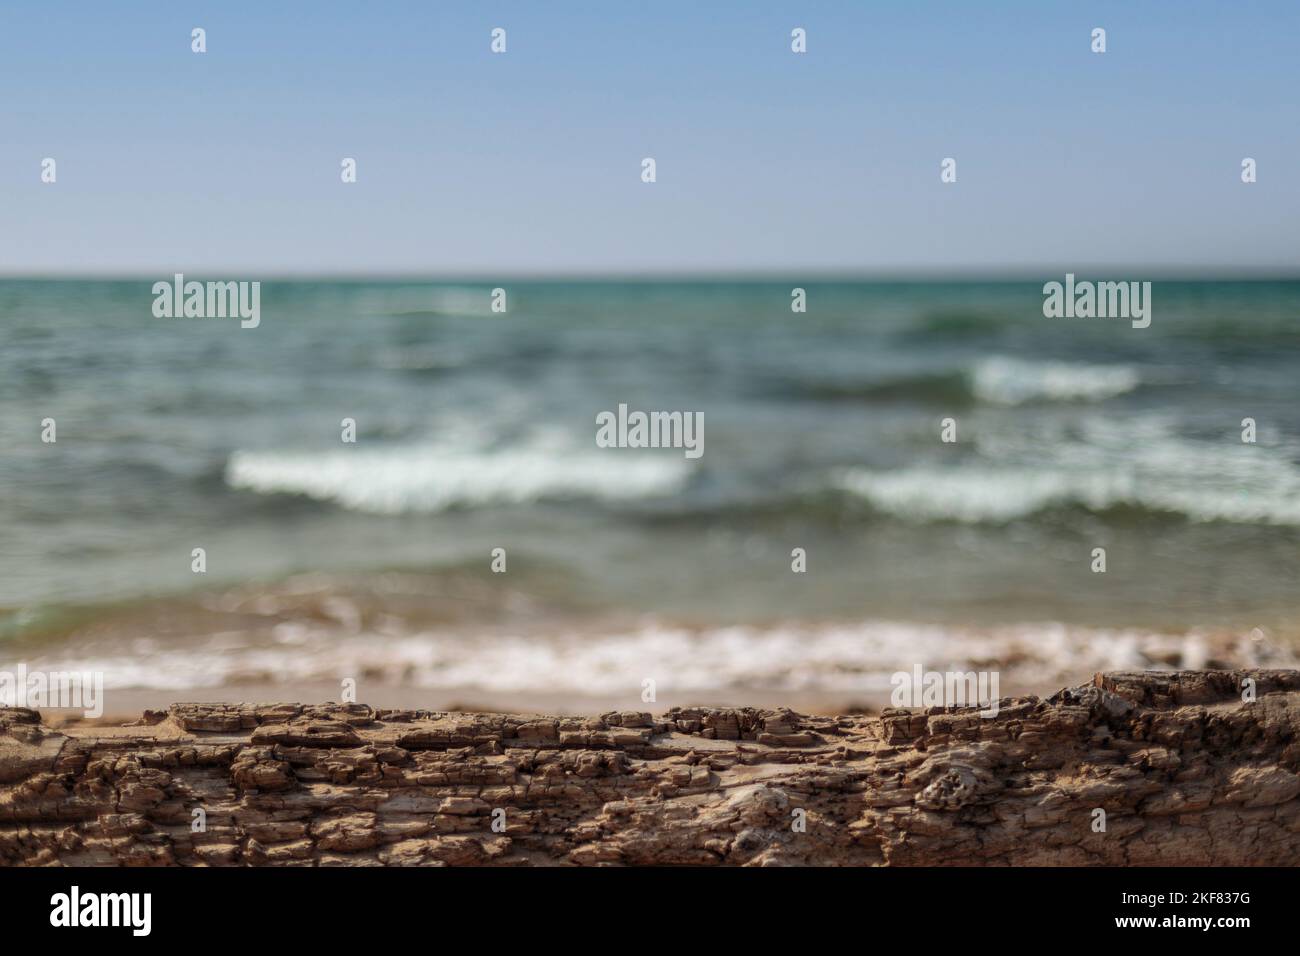 Mock-up to insert product packaging. Natural background, beach and wooden log. Stock Photo